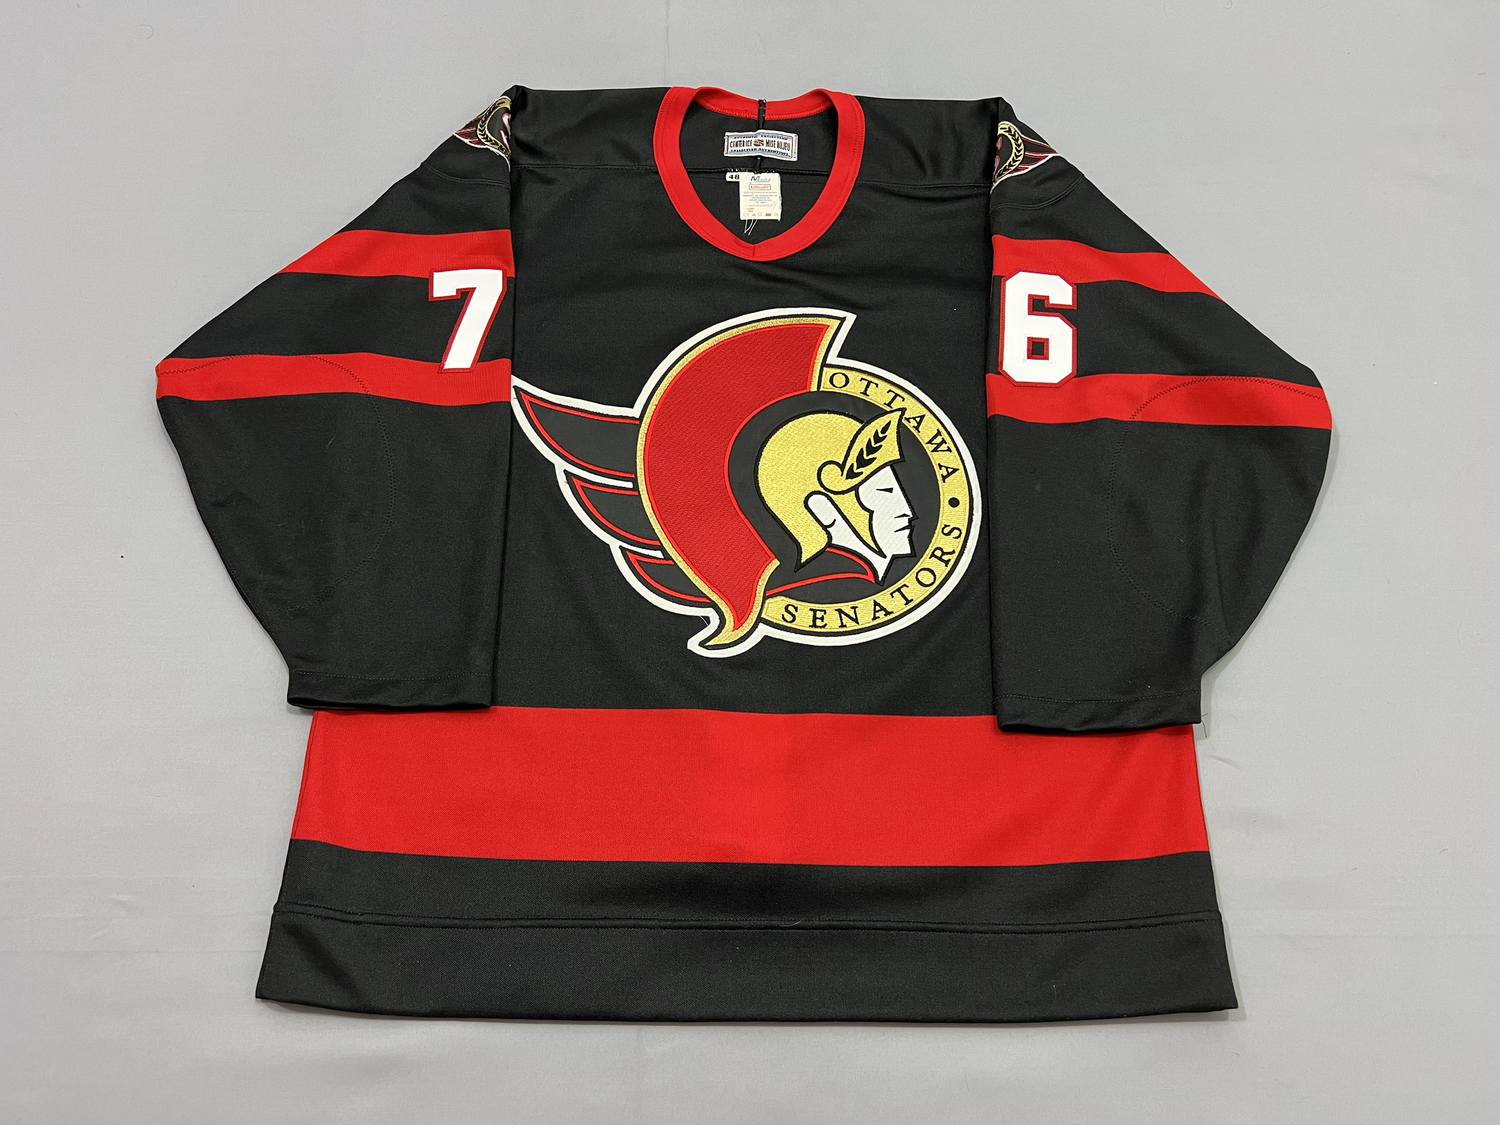 A very silly project. — Liberty Bell Jerseys